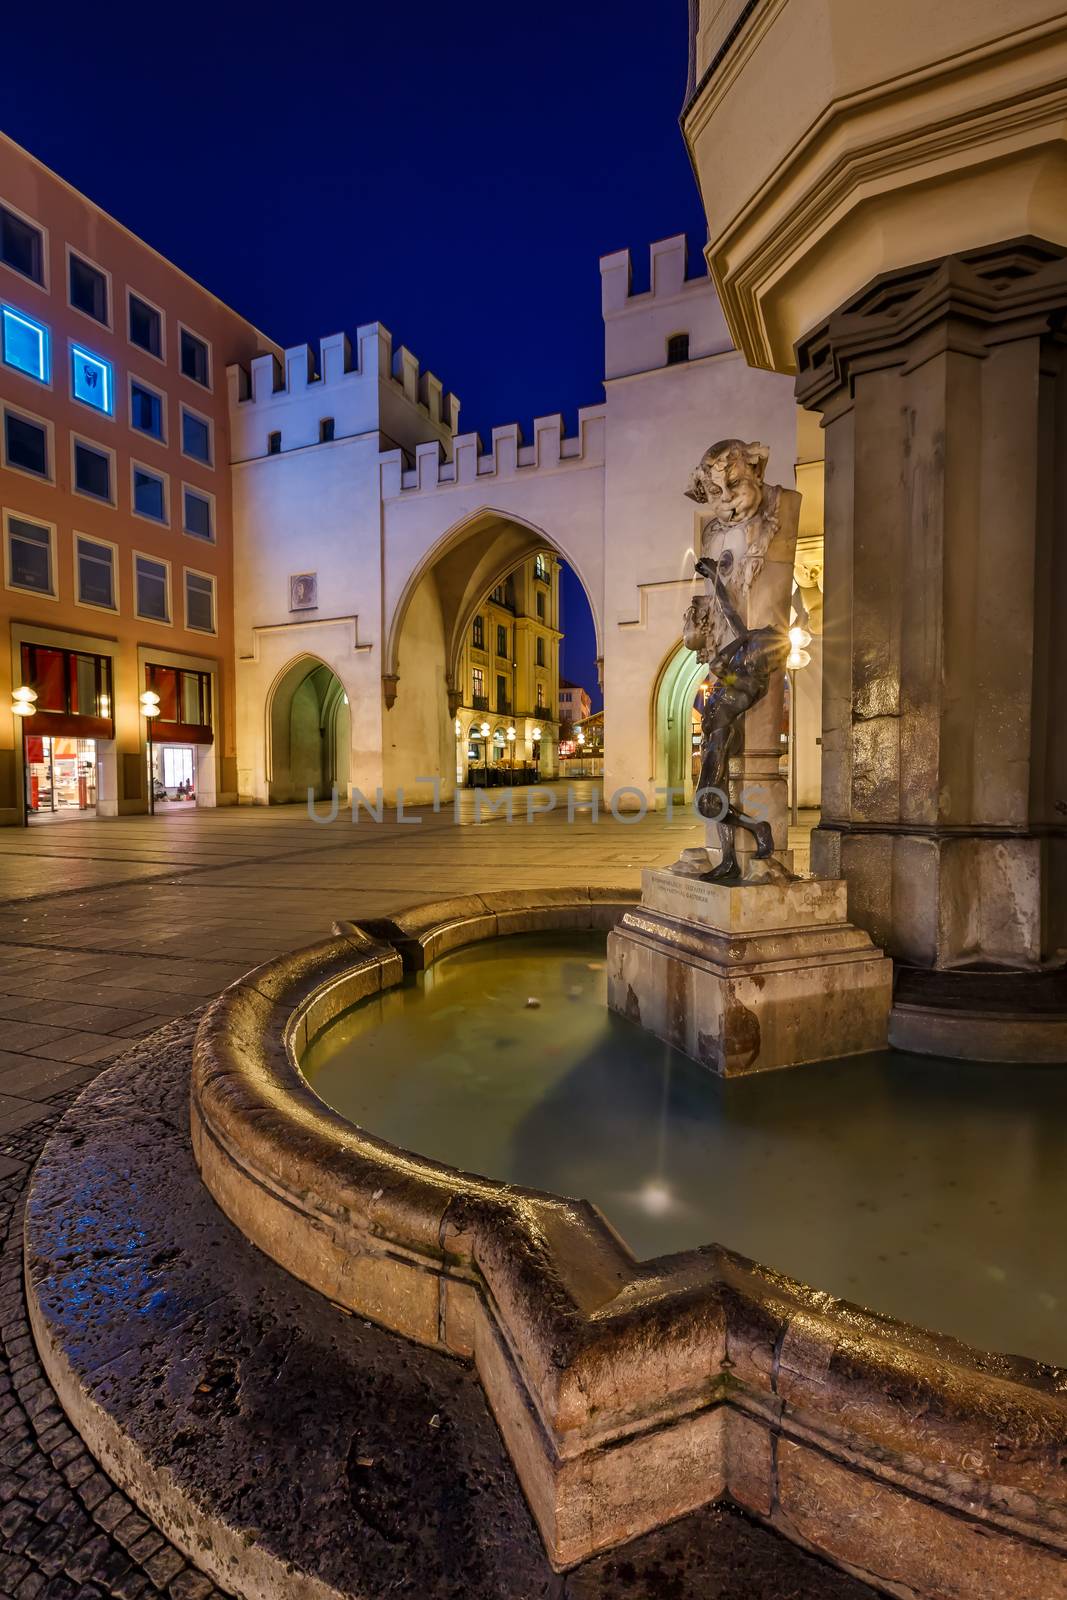 Brunnenbuberl Fountain and Karlstor Gate in the Evening, Munich, by anshar